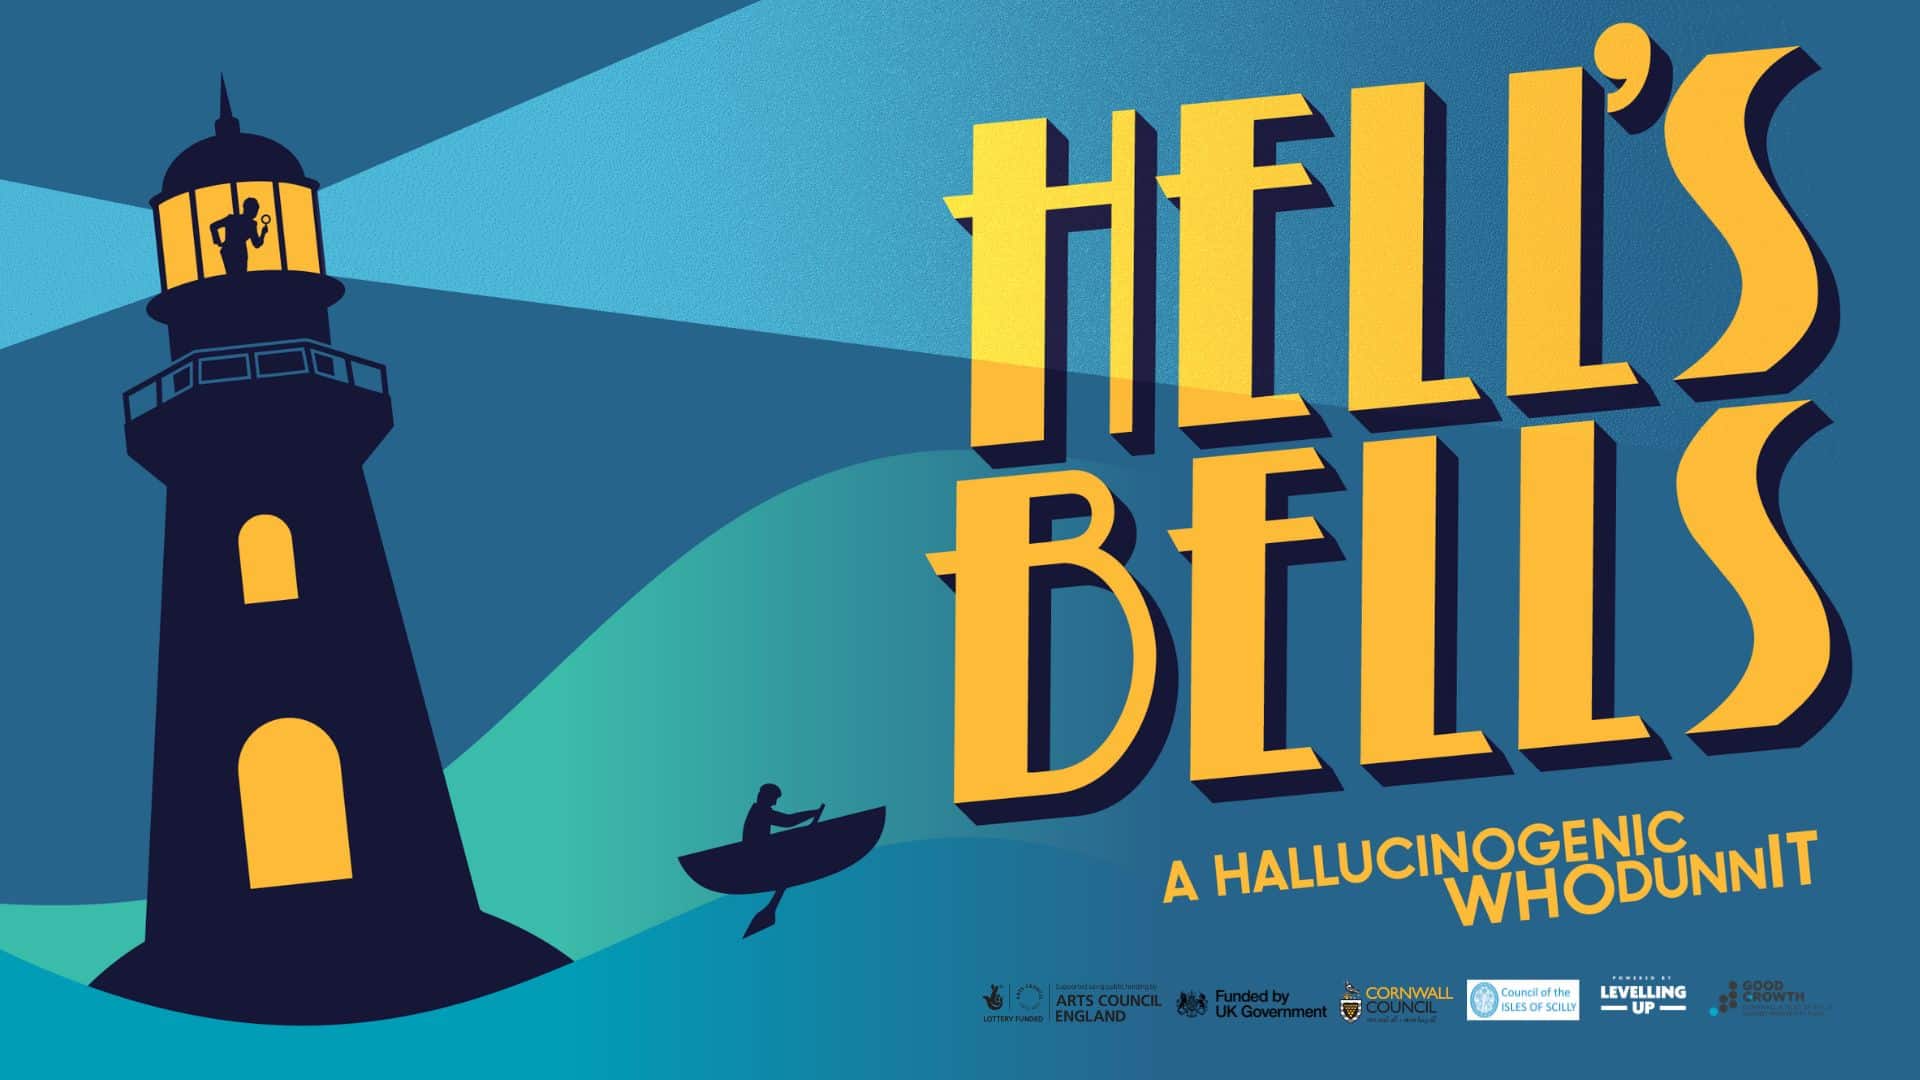 Hell’s Bells artwork. Illustrated. Gradient background of blue and green hues, making the shakes of a rough sea and the sky above it. (Left) A lighthouse beams light across both sides of the artwork. At the top of the lighthouse, a silhouette of a person holding a magnifying glass. Beneath the lighthouse, a silhouette of a person pulling oars in a rowboat. (Right) Yellow text reads: ‘Hell’s Bells. A Hallucinogenic Whodunnit.’